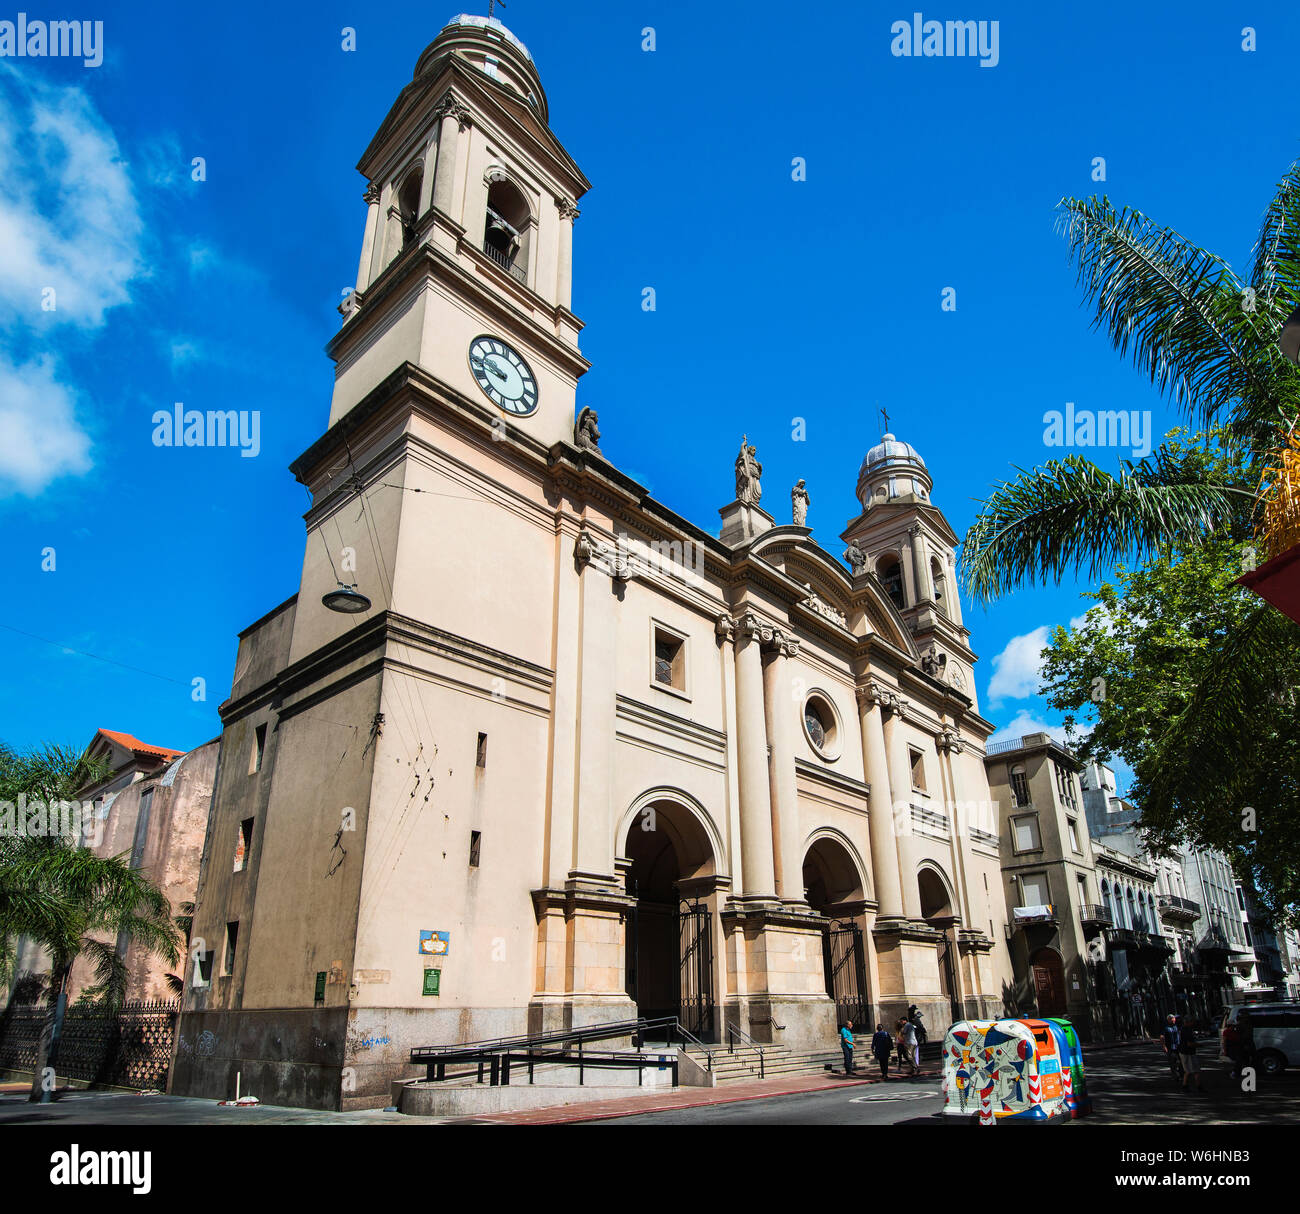 Montevideo Metropolitan Cathedral is the main Roman Catholic Church of Montevideo, and seat of its archdiocese, Montevideo, Uruguay. Stock Photo